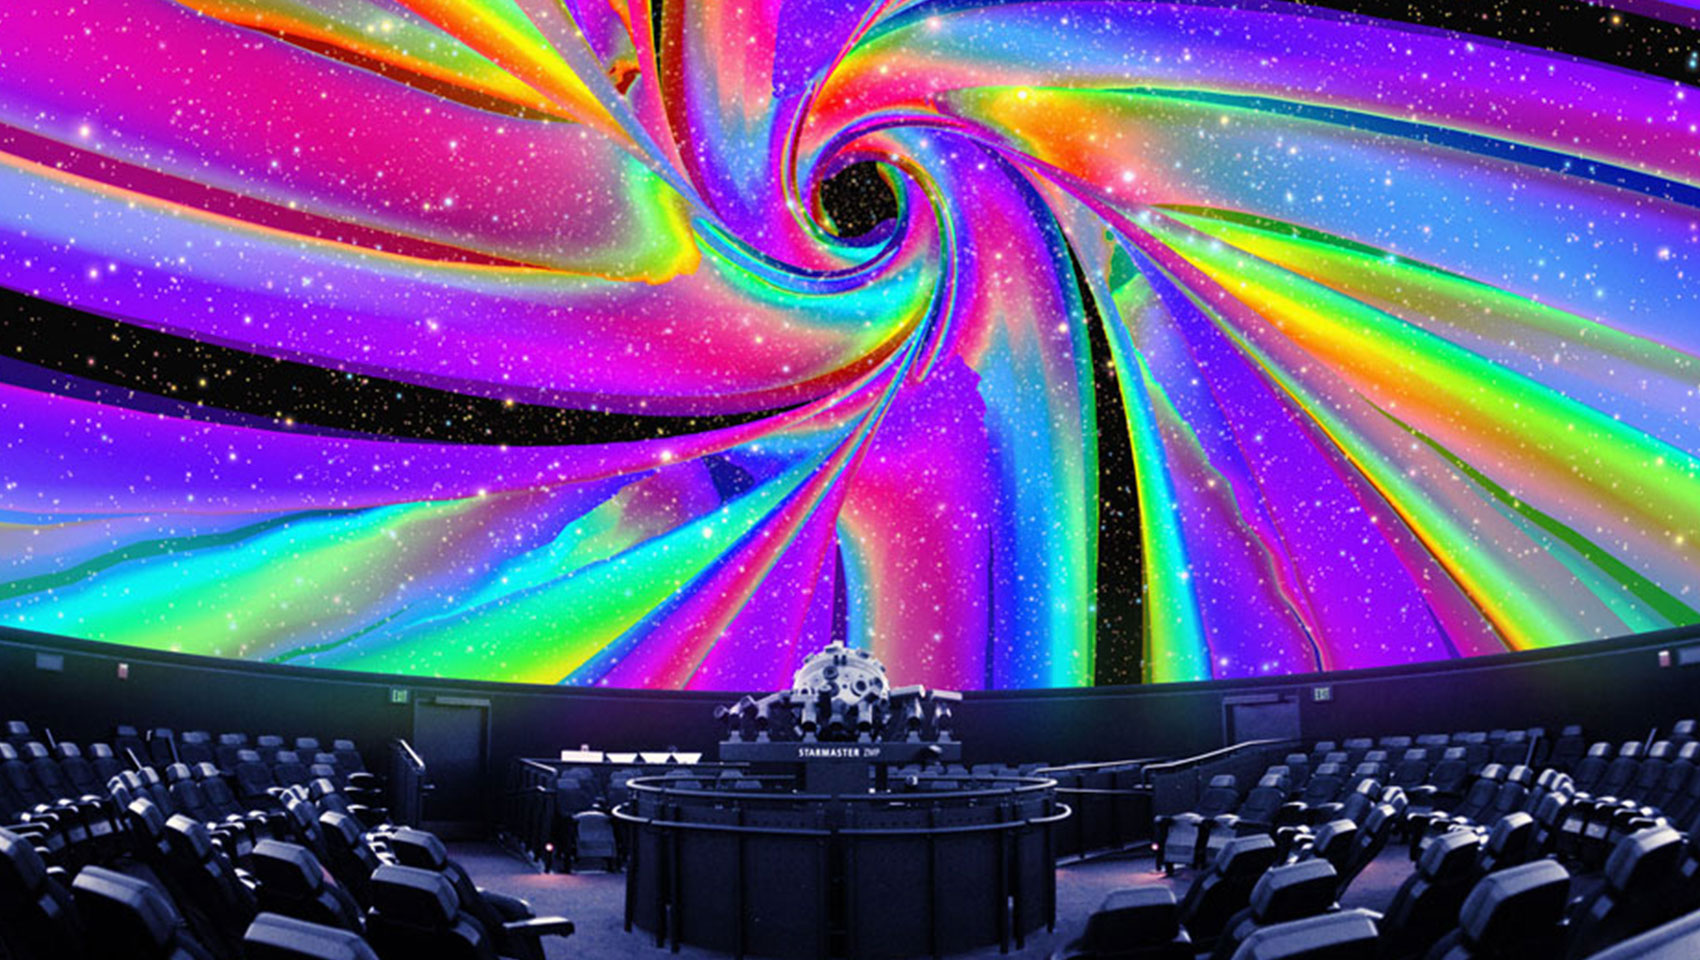 Museum of Science Light Show in planetarium dome projecting colorful lights